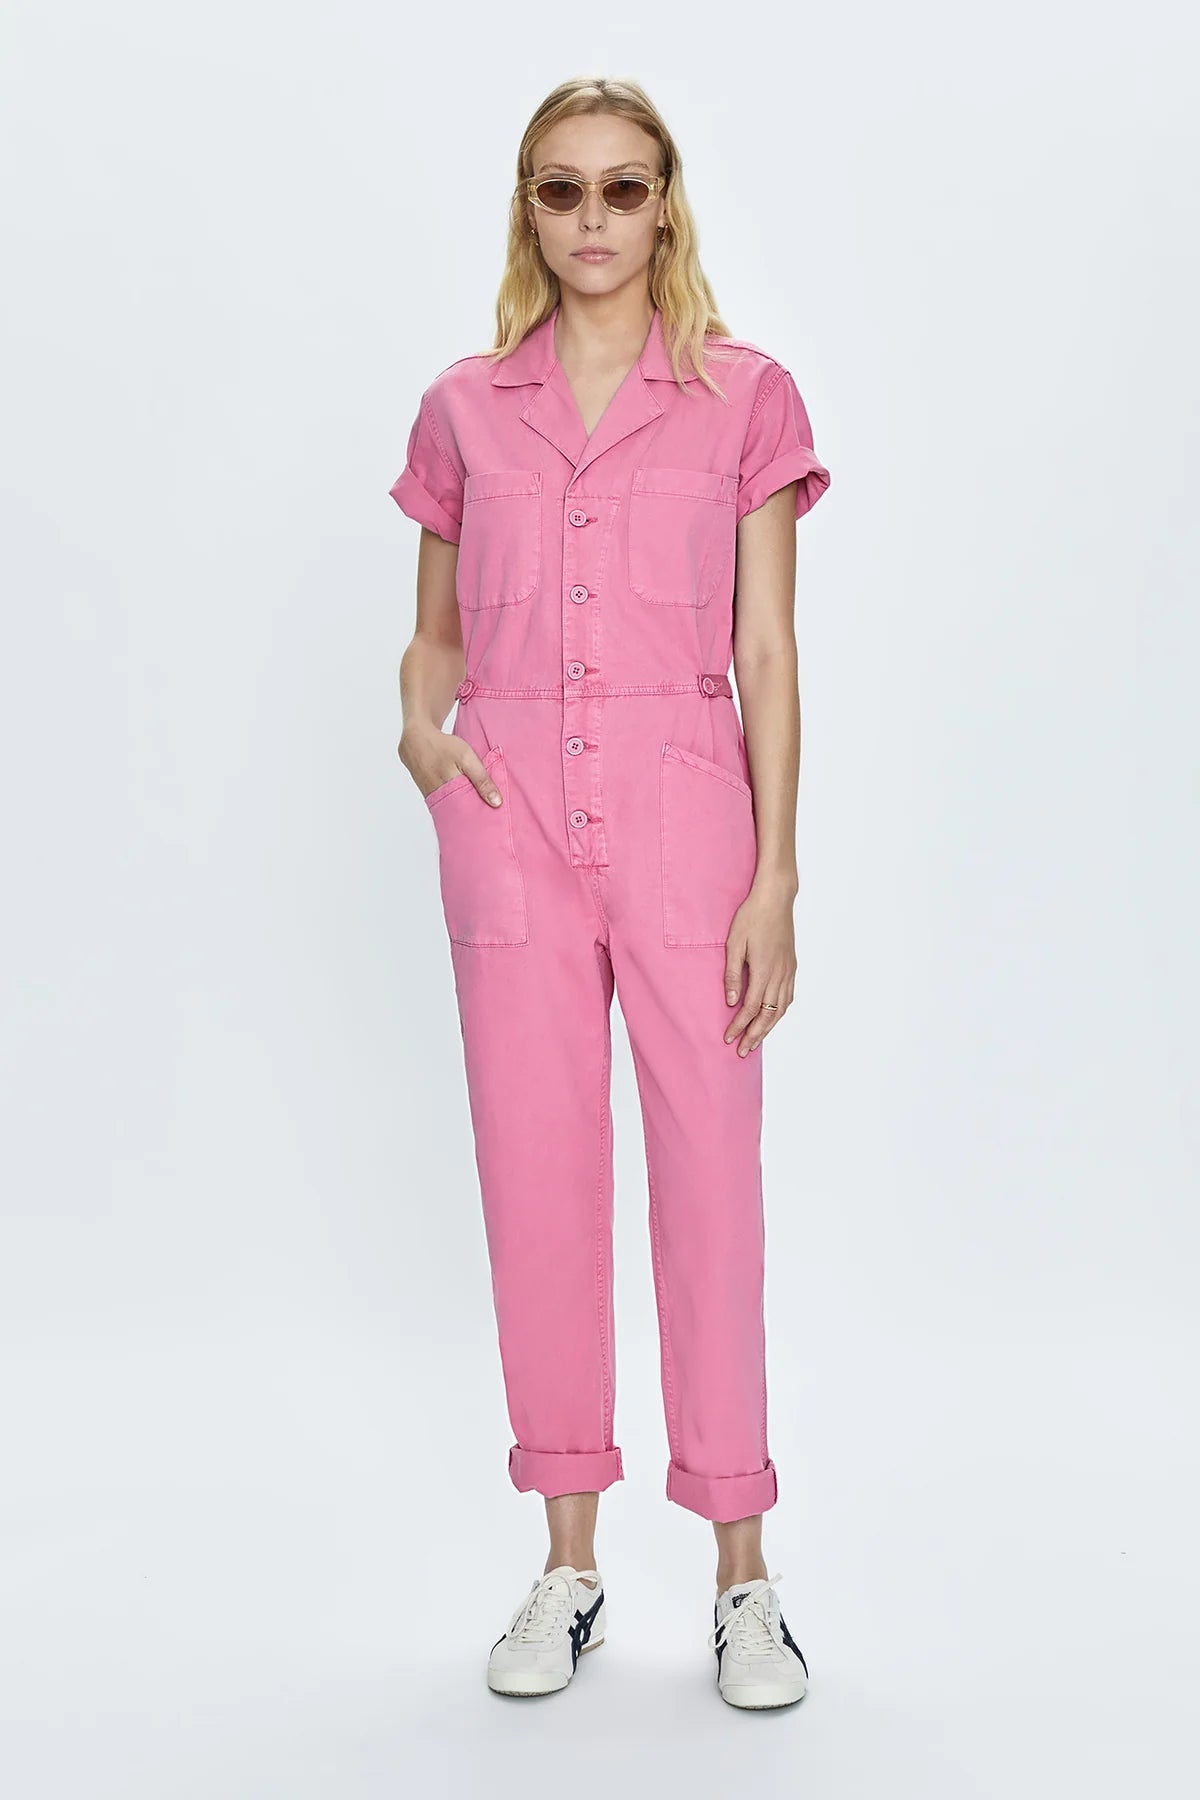 Grover Short Sleeve Field Suit - Styled With Claire Pistola